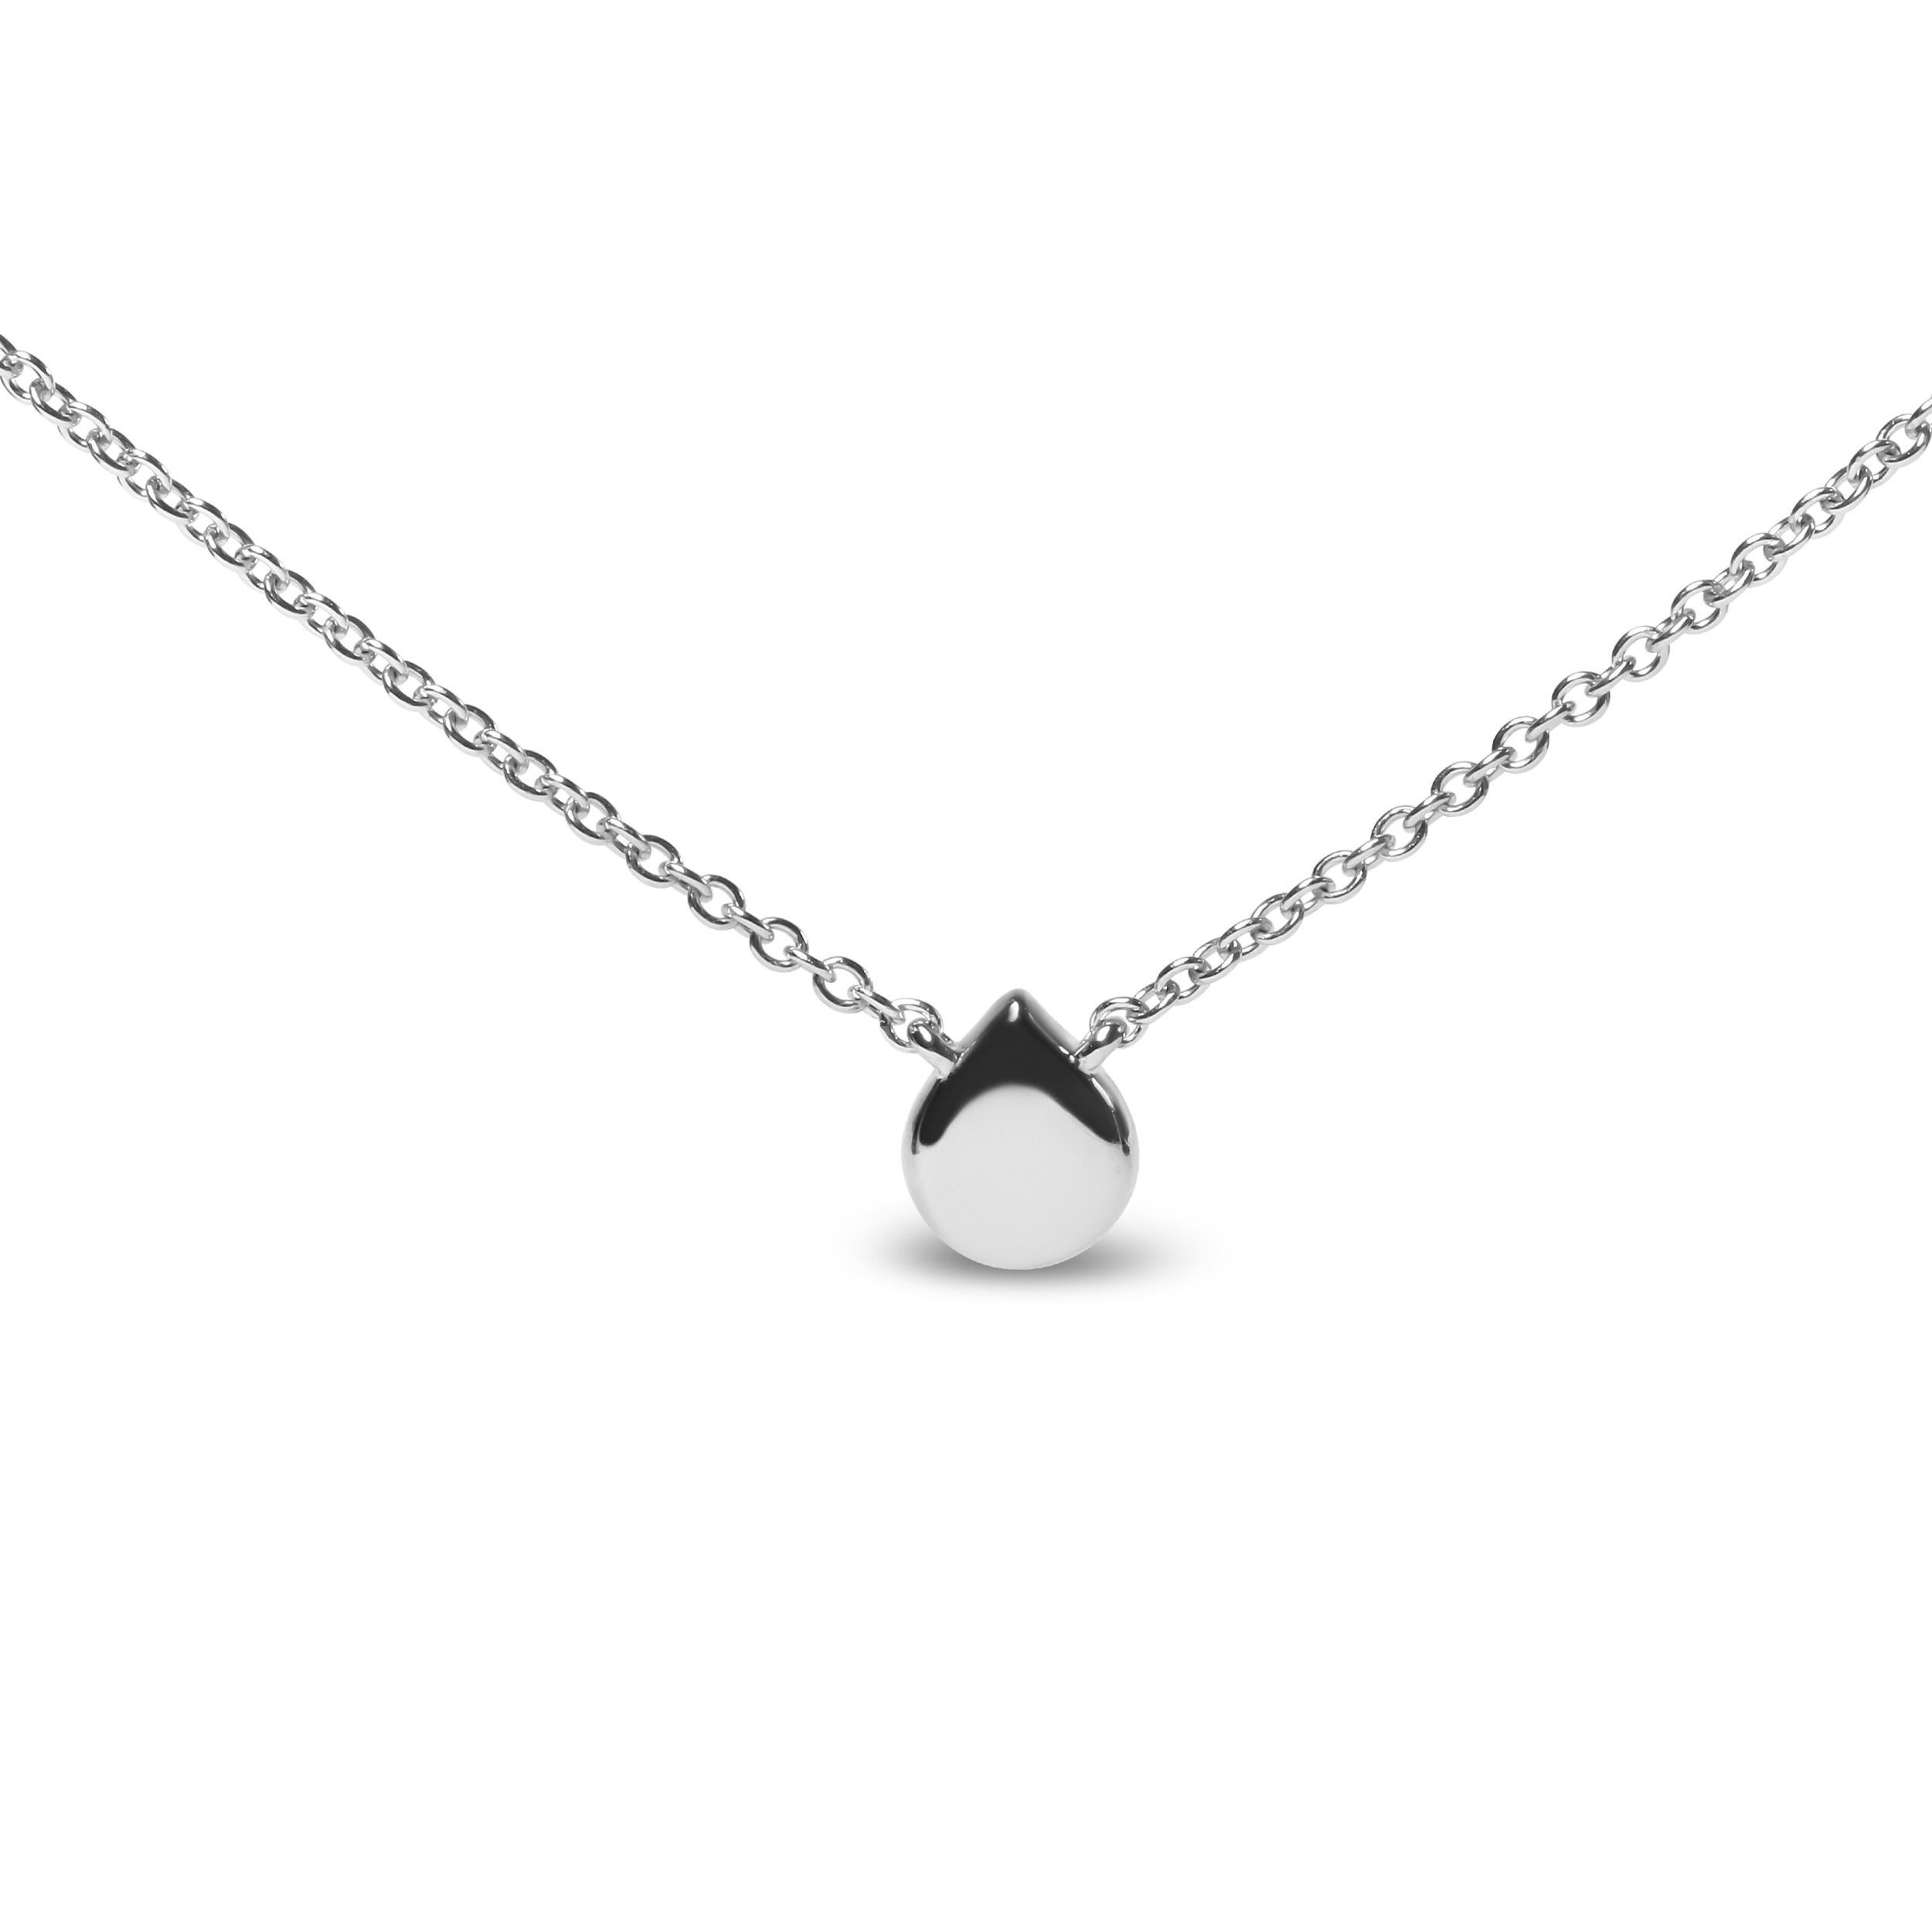 This stunningly unique pendant necklace is crafted of genuine 18k white gold featuring a round diamond accent stone in a prong setting that is haloed by natural 1mm round heat-treated blue sapphires. This solitaire diamond accent is of an